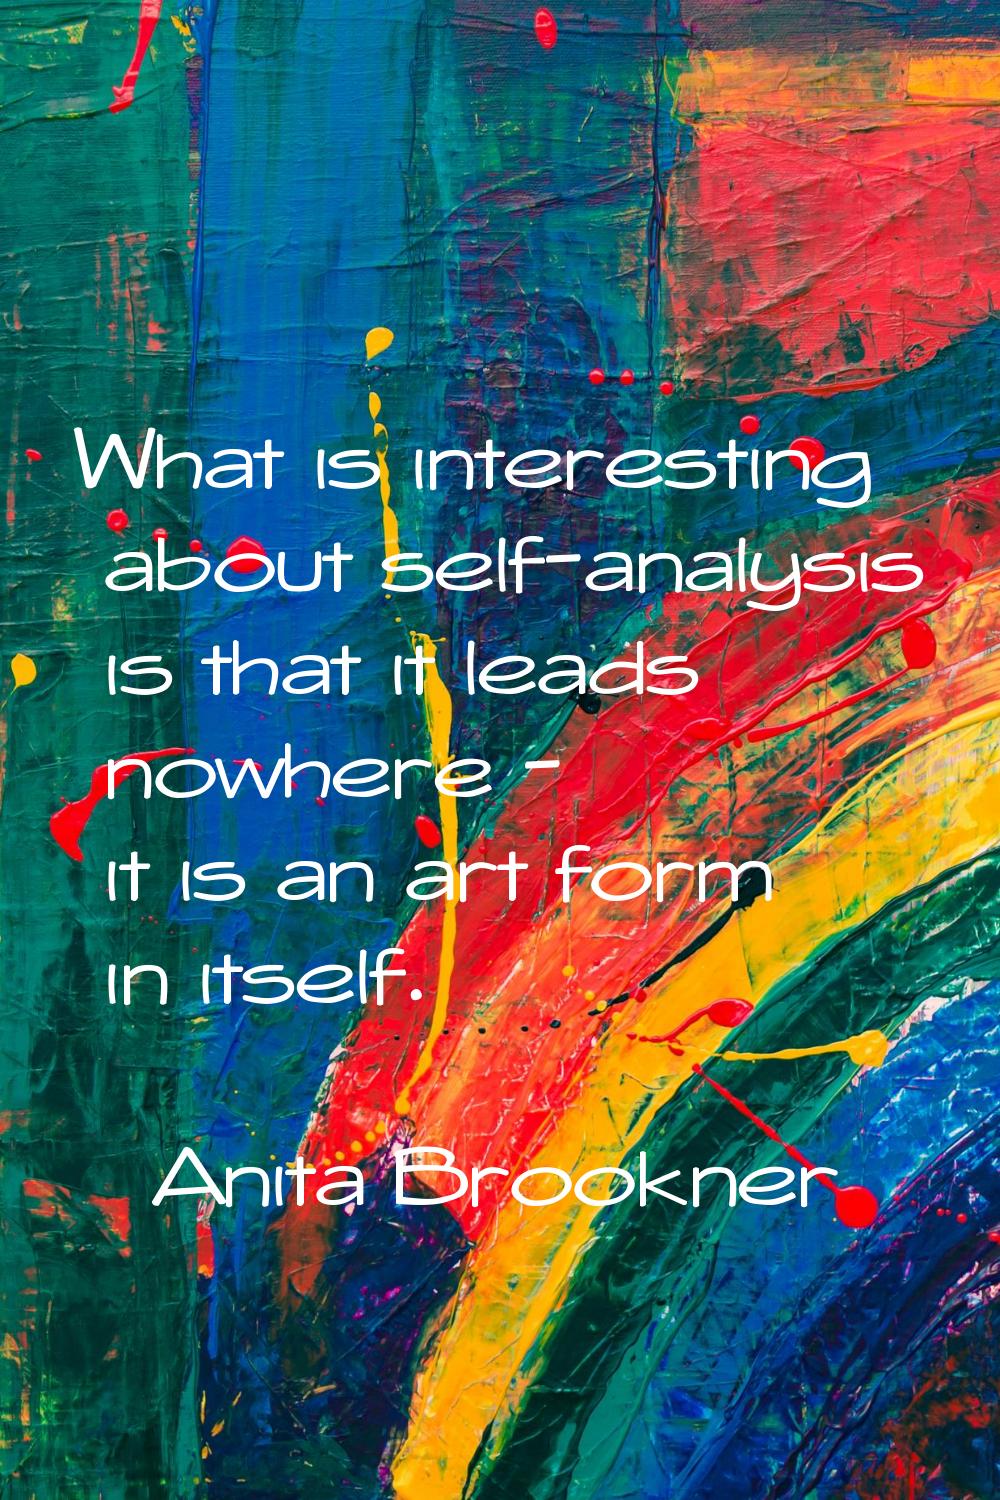 What is interesting about self-analysis is that it leads nowhere - it is an art form in itself.